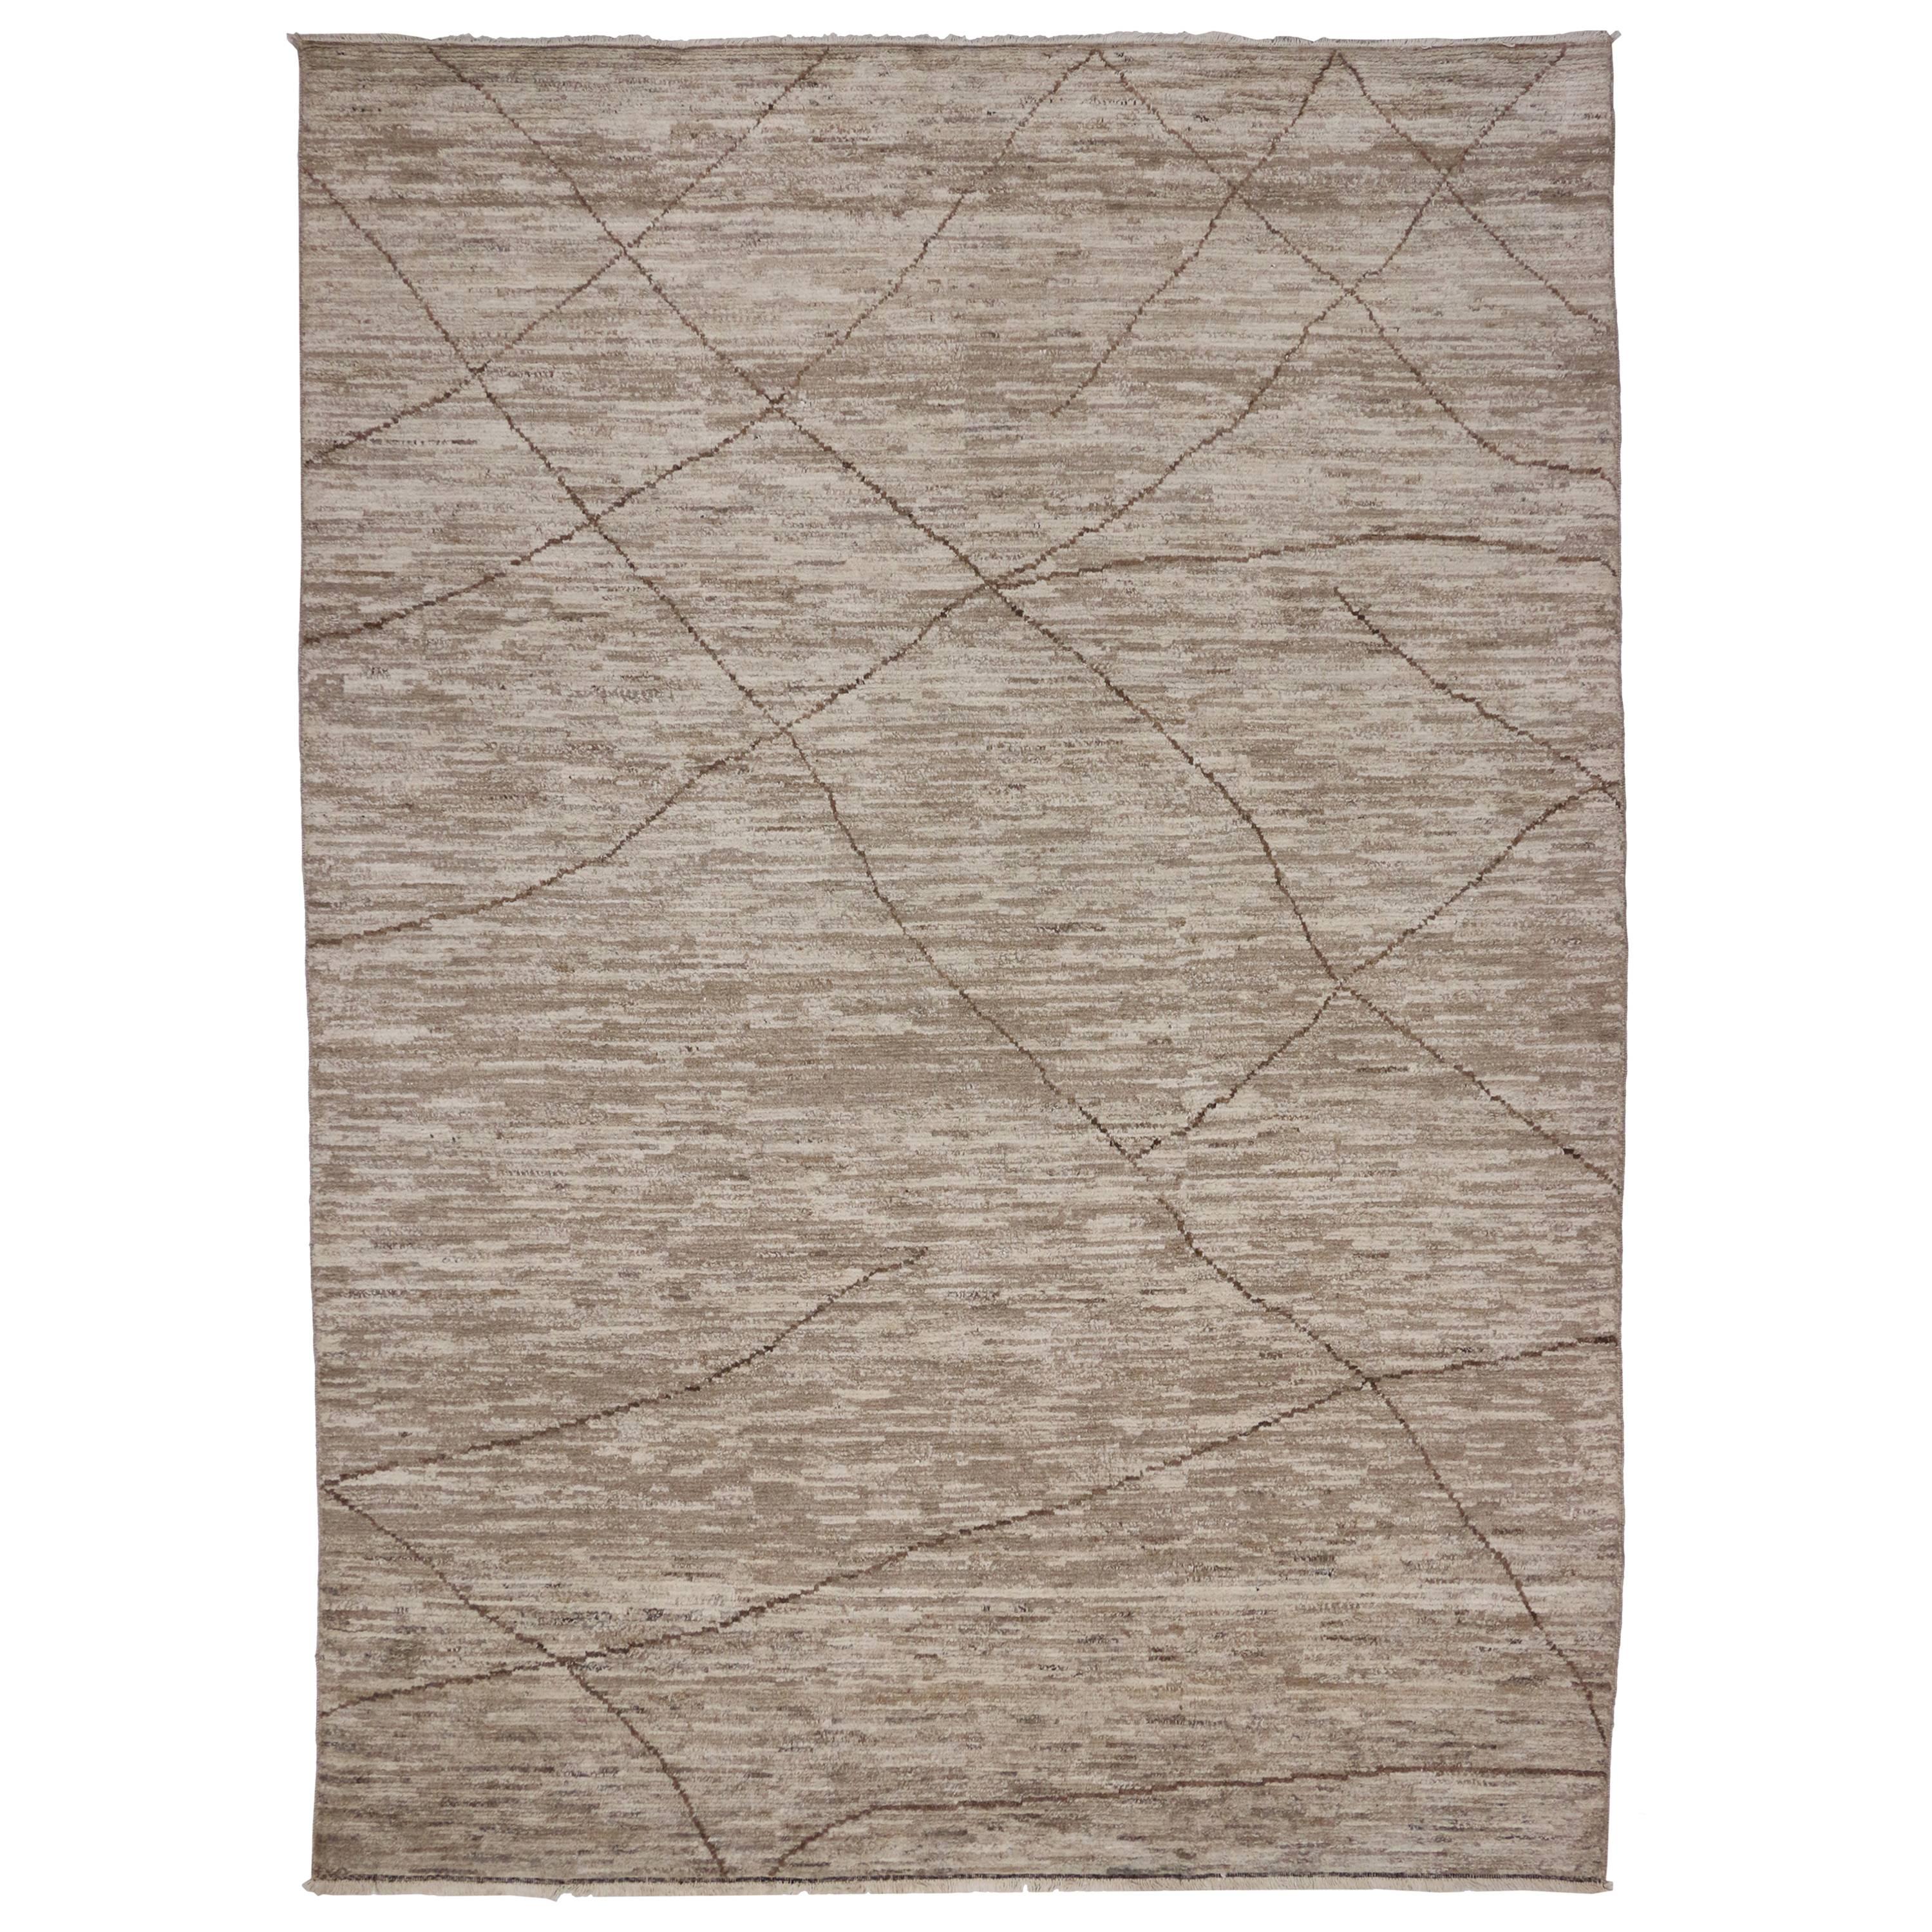 New Contemporary Moroccan Area Rug with Modern Design, Warm Neutral Earth Tones